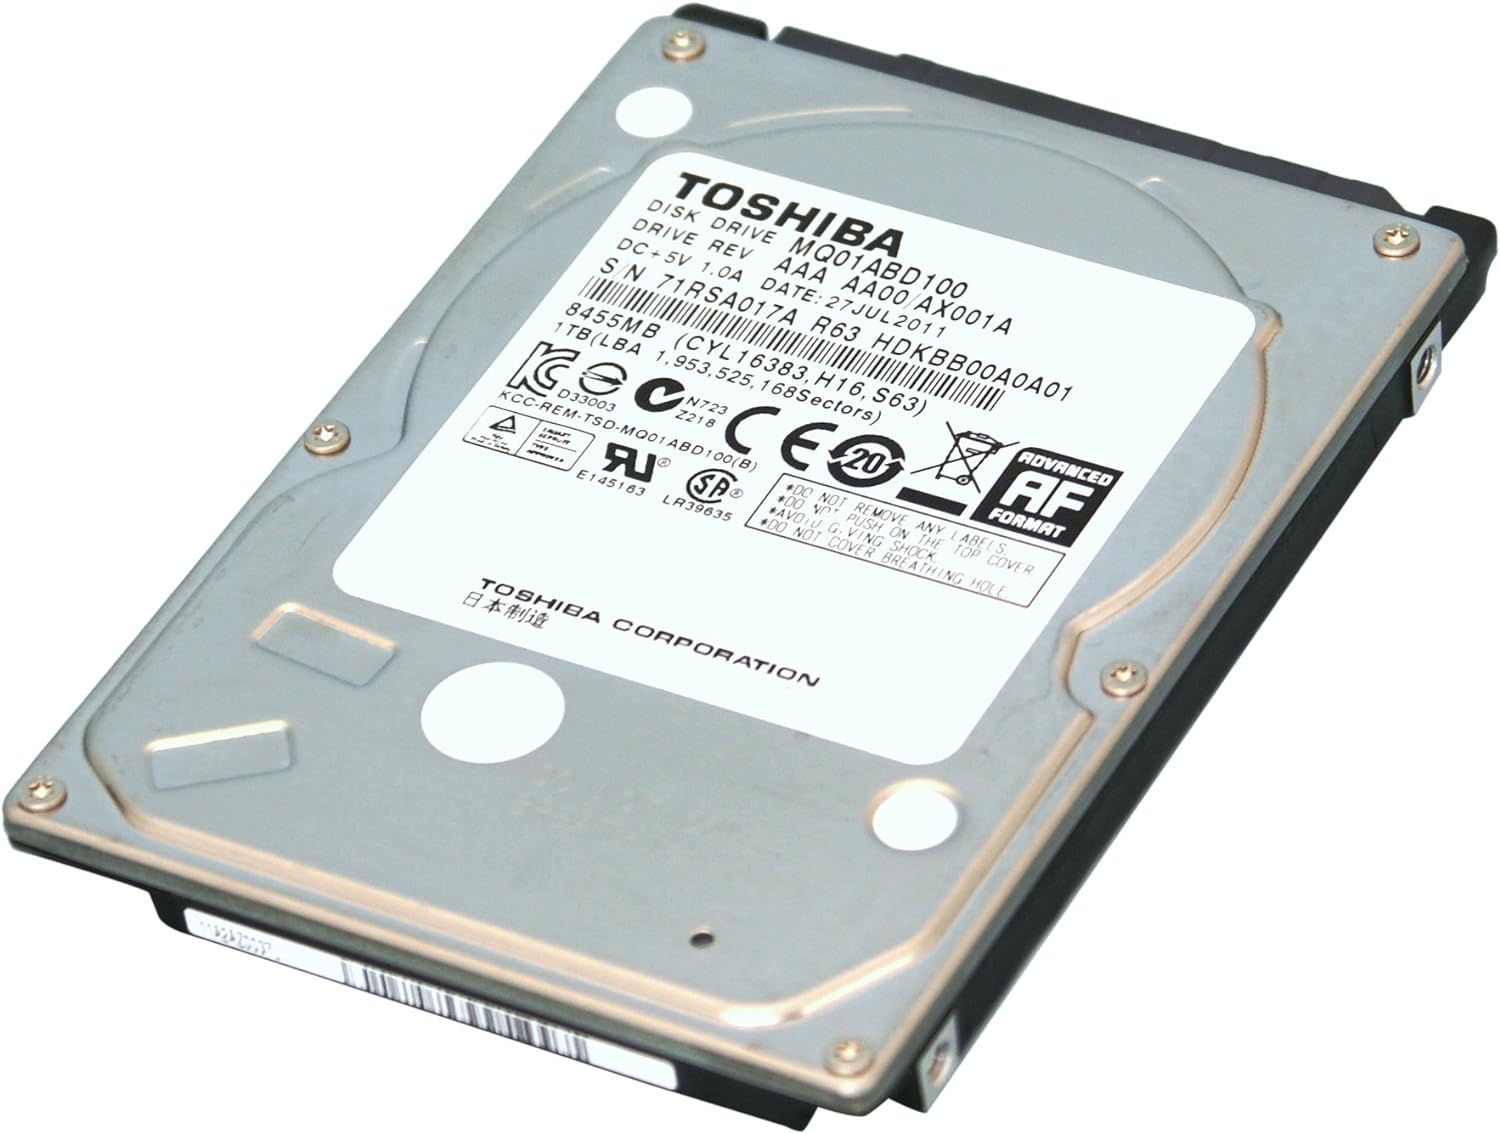 Best HDD for Laptop - Top 5 Picks for Reliable Storage Solutions